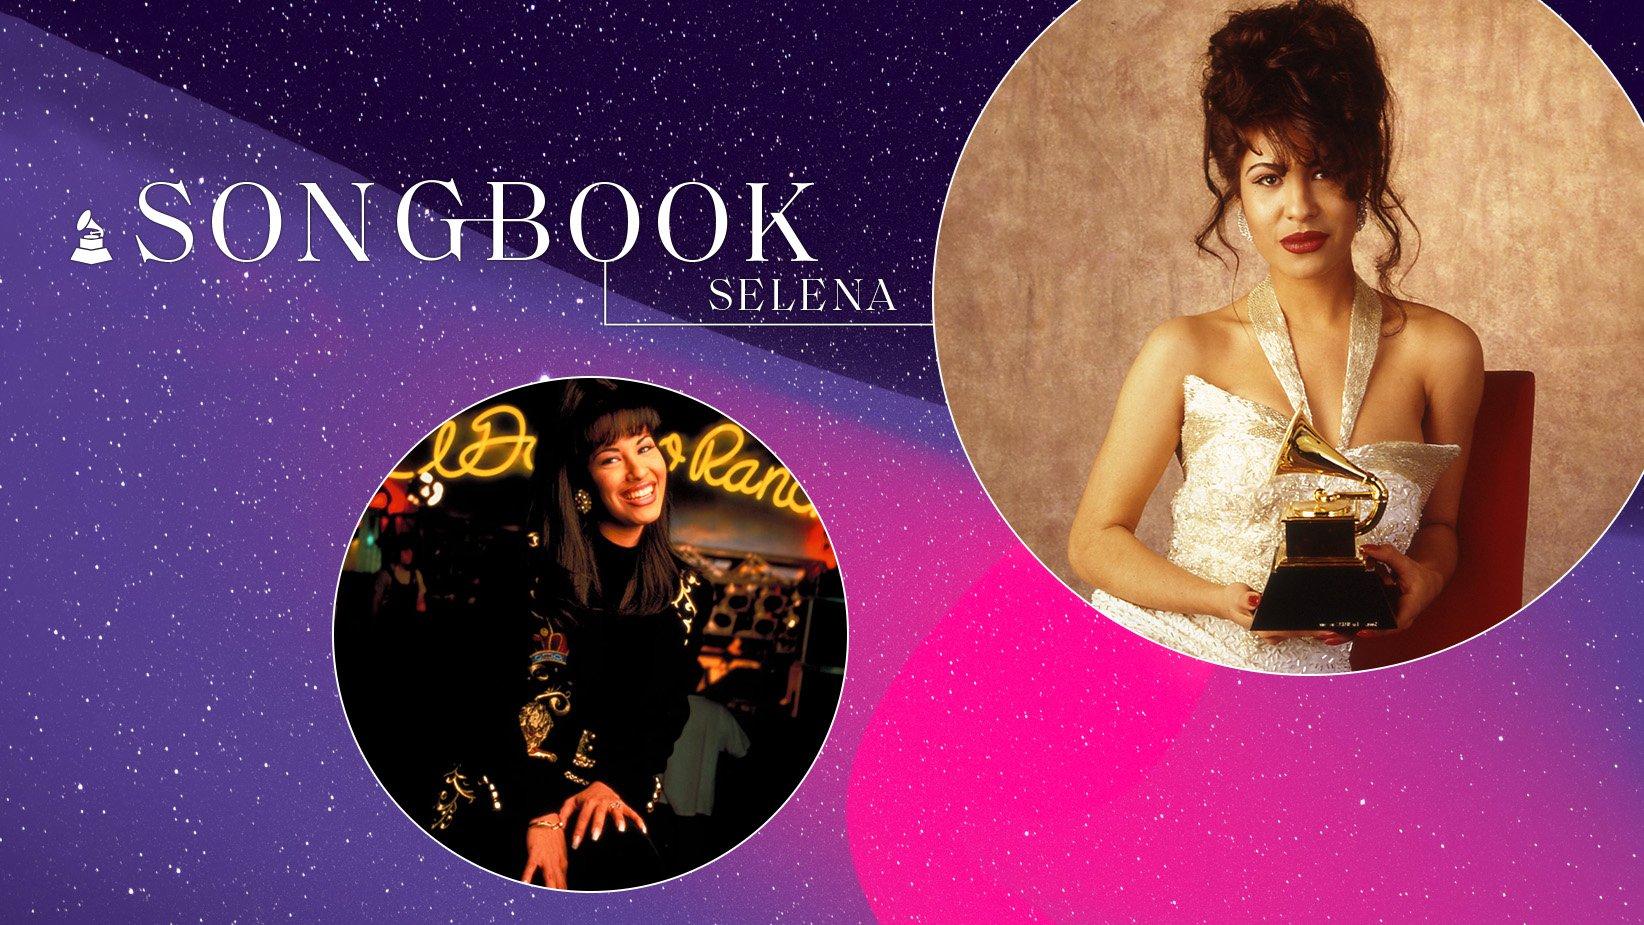 Photos of Selena throughout the years